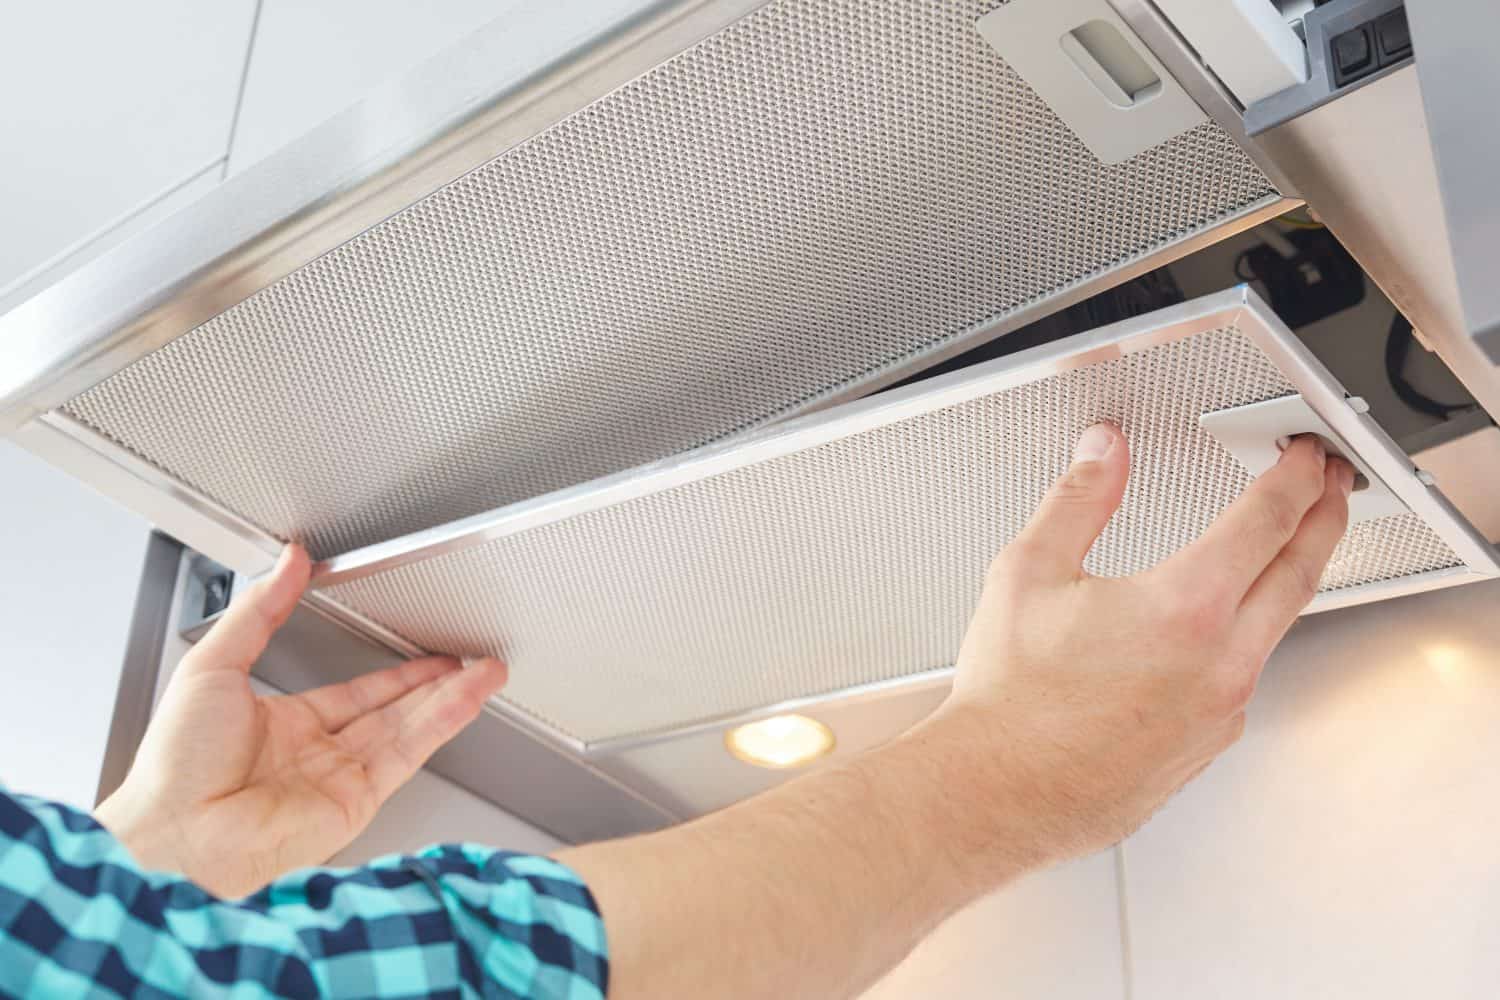 Removing a filter from cooker hood for cleaning or service. Replacing filter in kitchen hood. Modern kitchen fan or range hood.